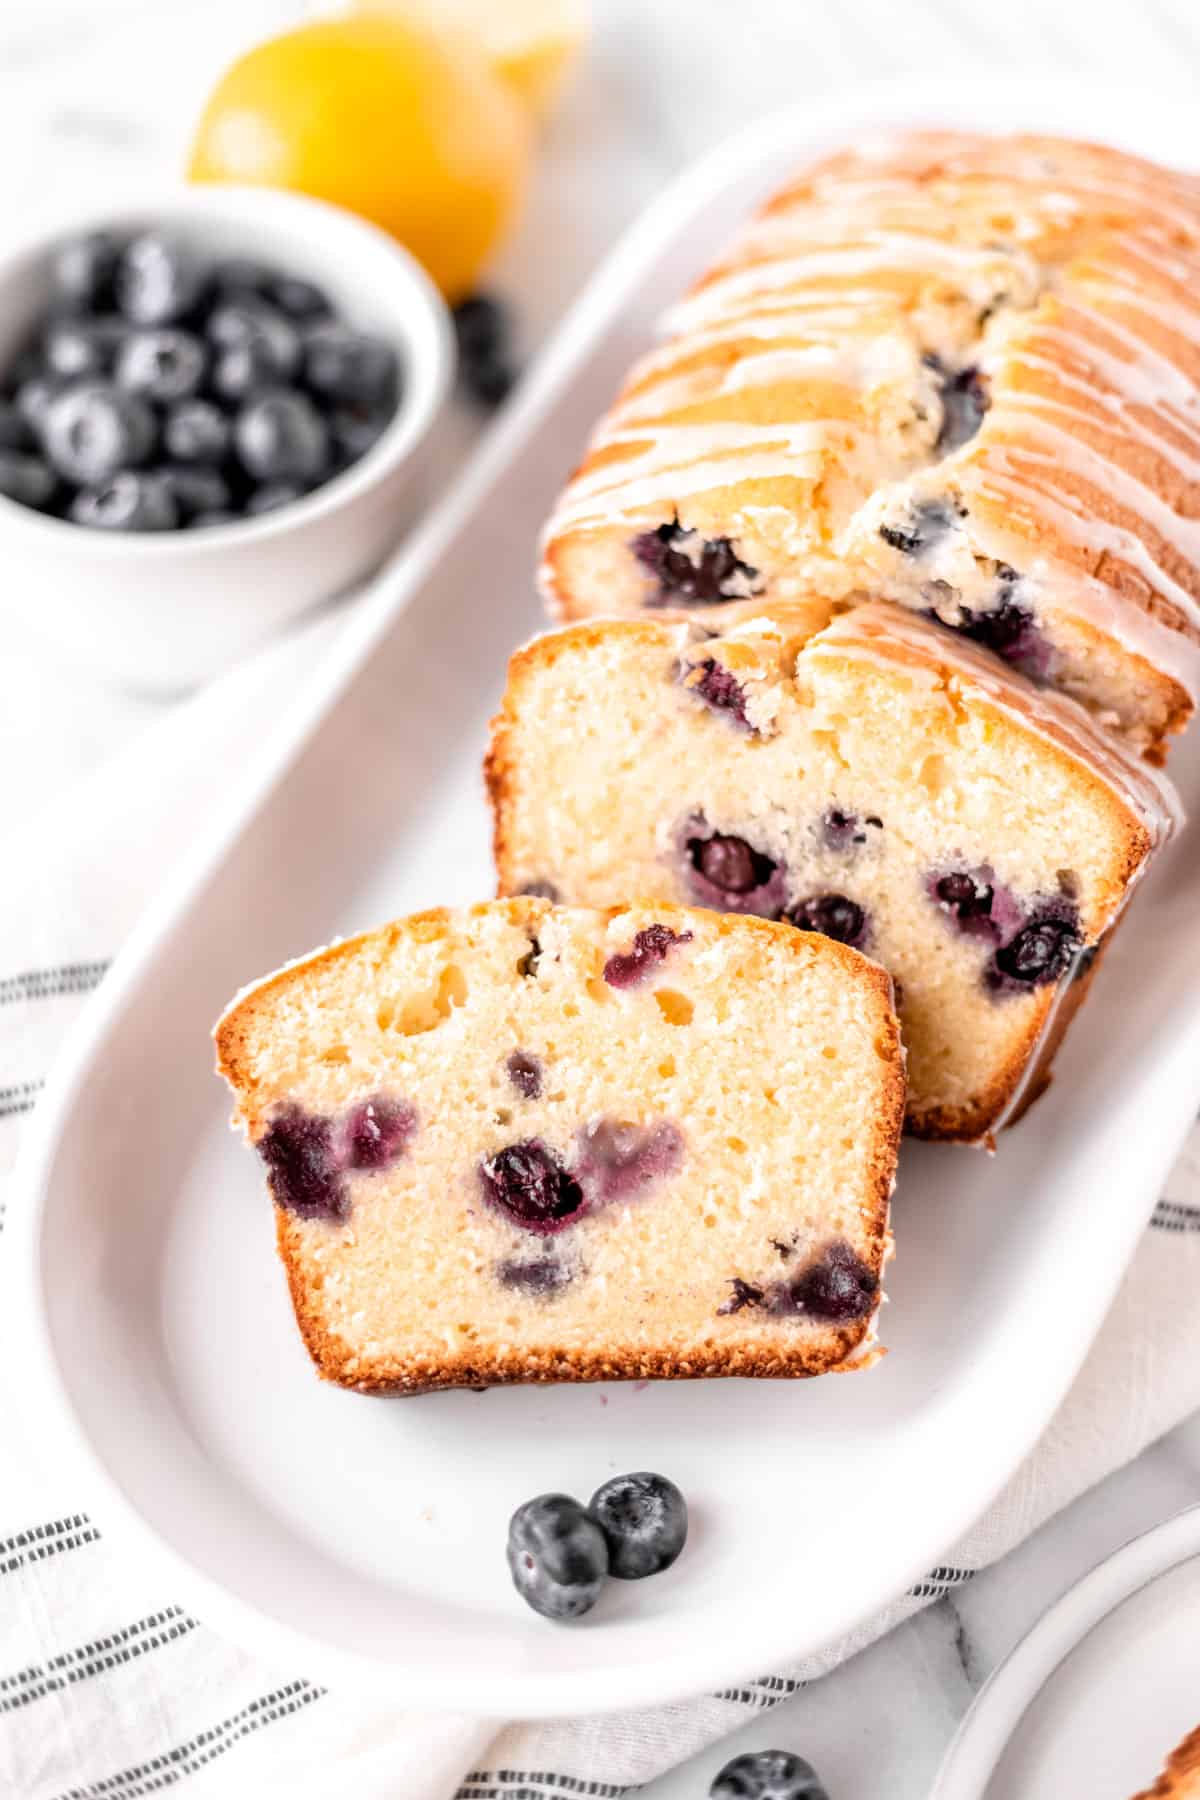 A lemon blueberry pound cake with several slices taken out on a serving plate with a striped tower and bowl of blueberries and lemon in the background.